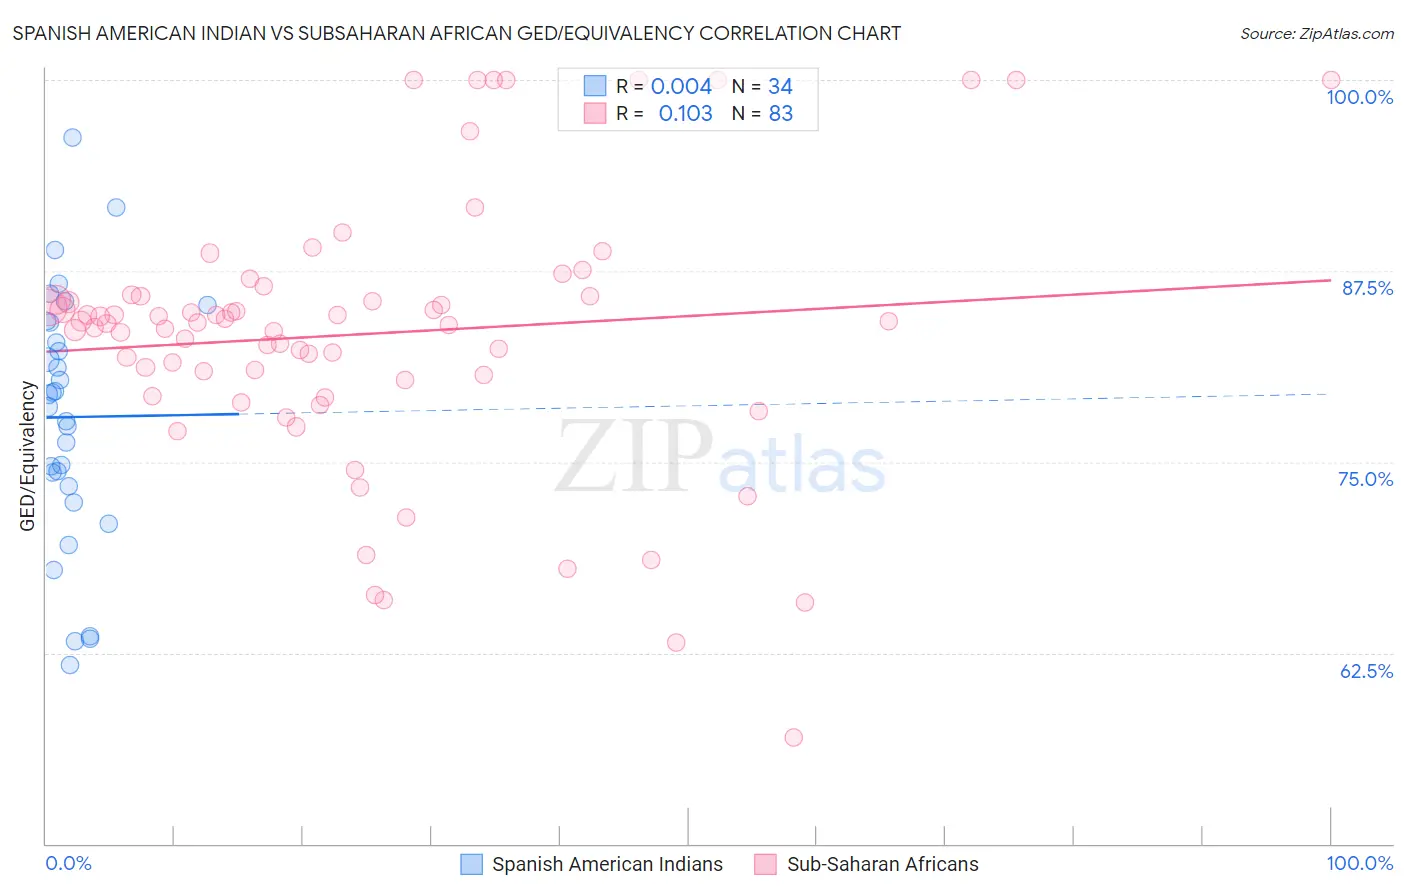 Spanish American Indian vs Subsaharan African GED/Equivalency